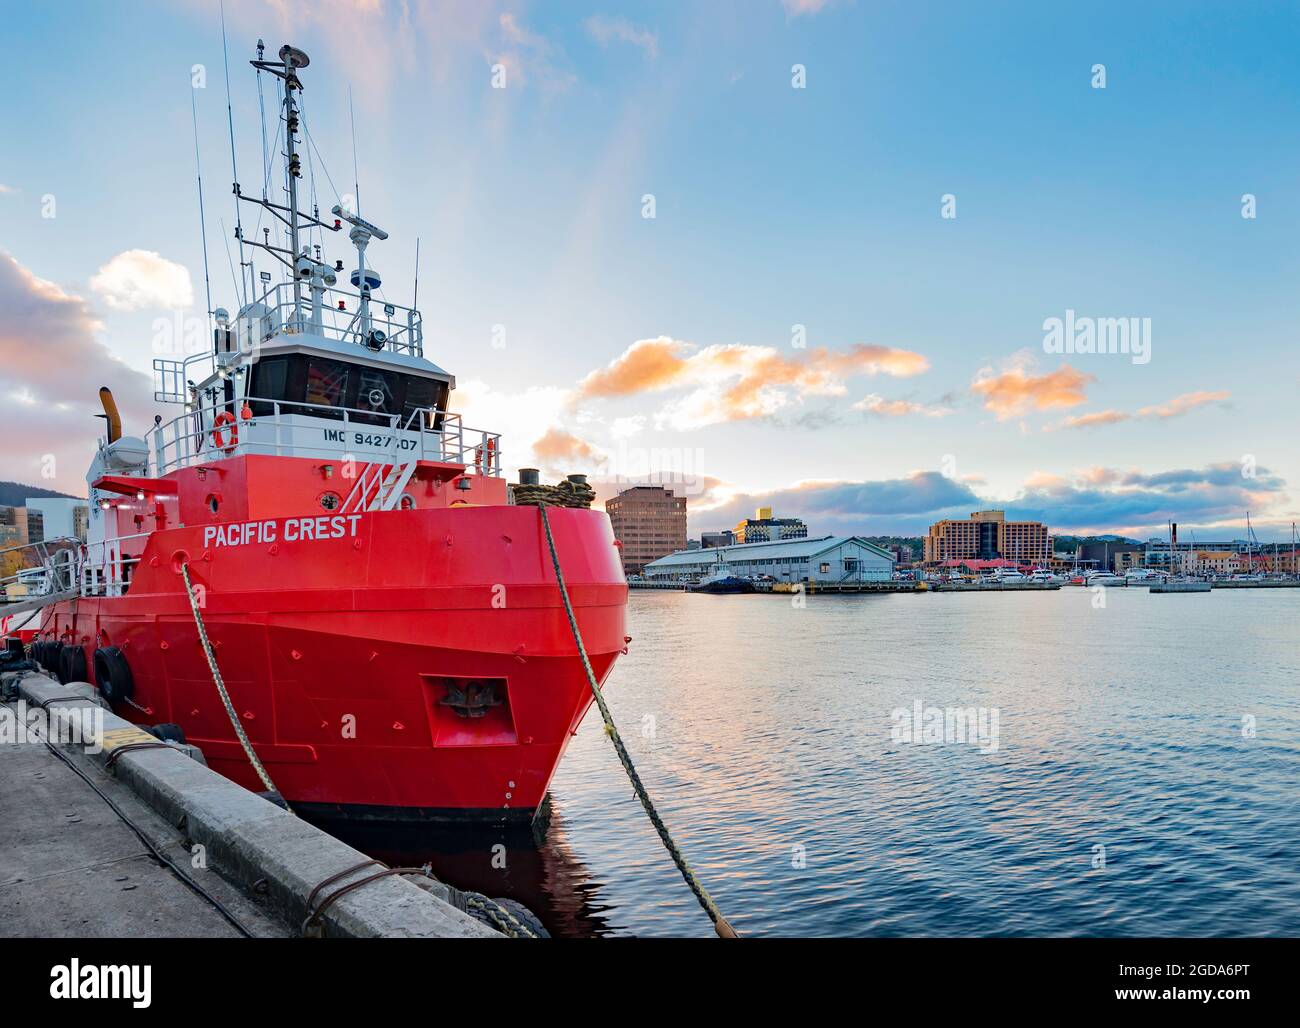 The ocean tug Pacific Crest moored in the late afternoon beside the Institute for Marine and Antarctic Studies building in Hobart, Tasmania, Australia Stock Photo